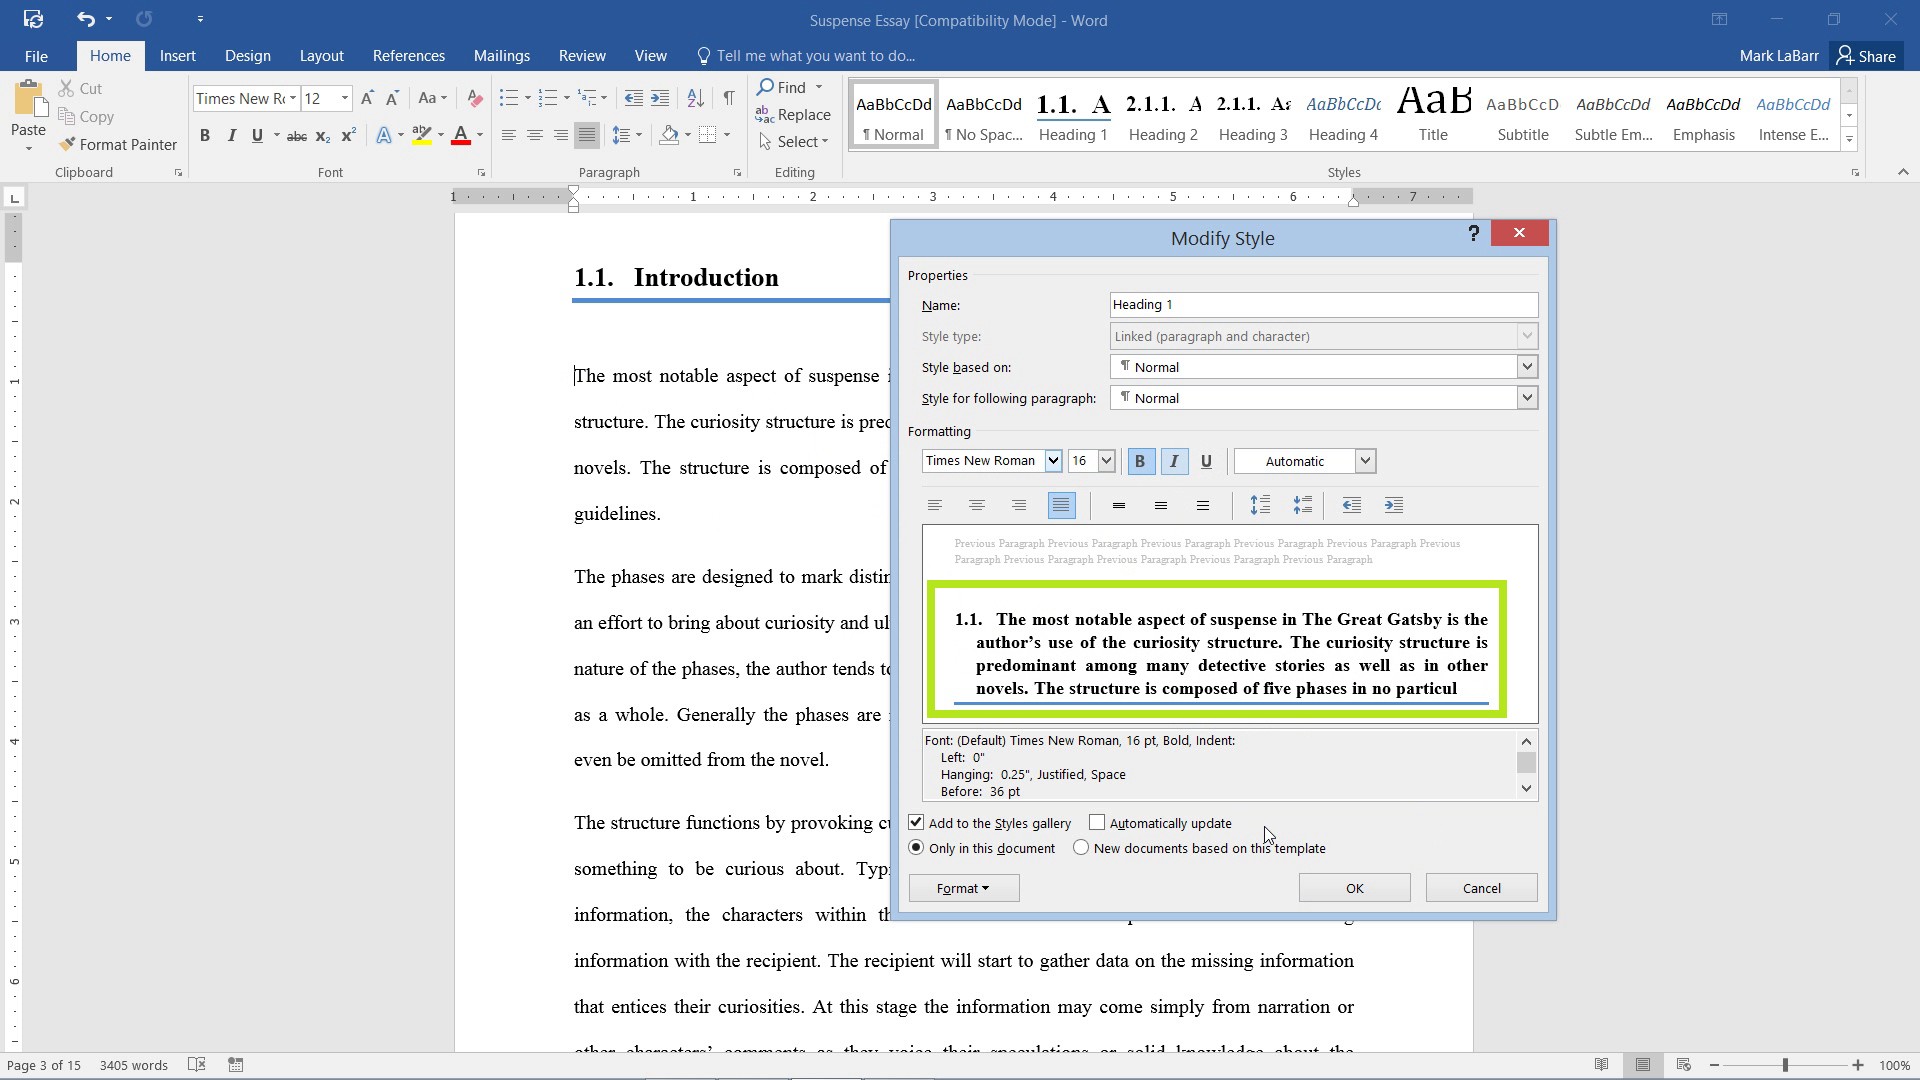 how to remove highlighting in word 2016